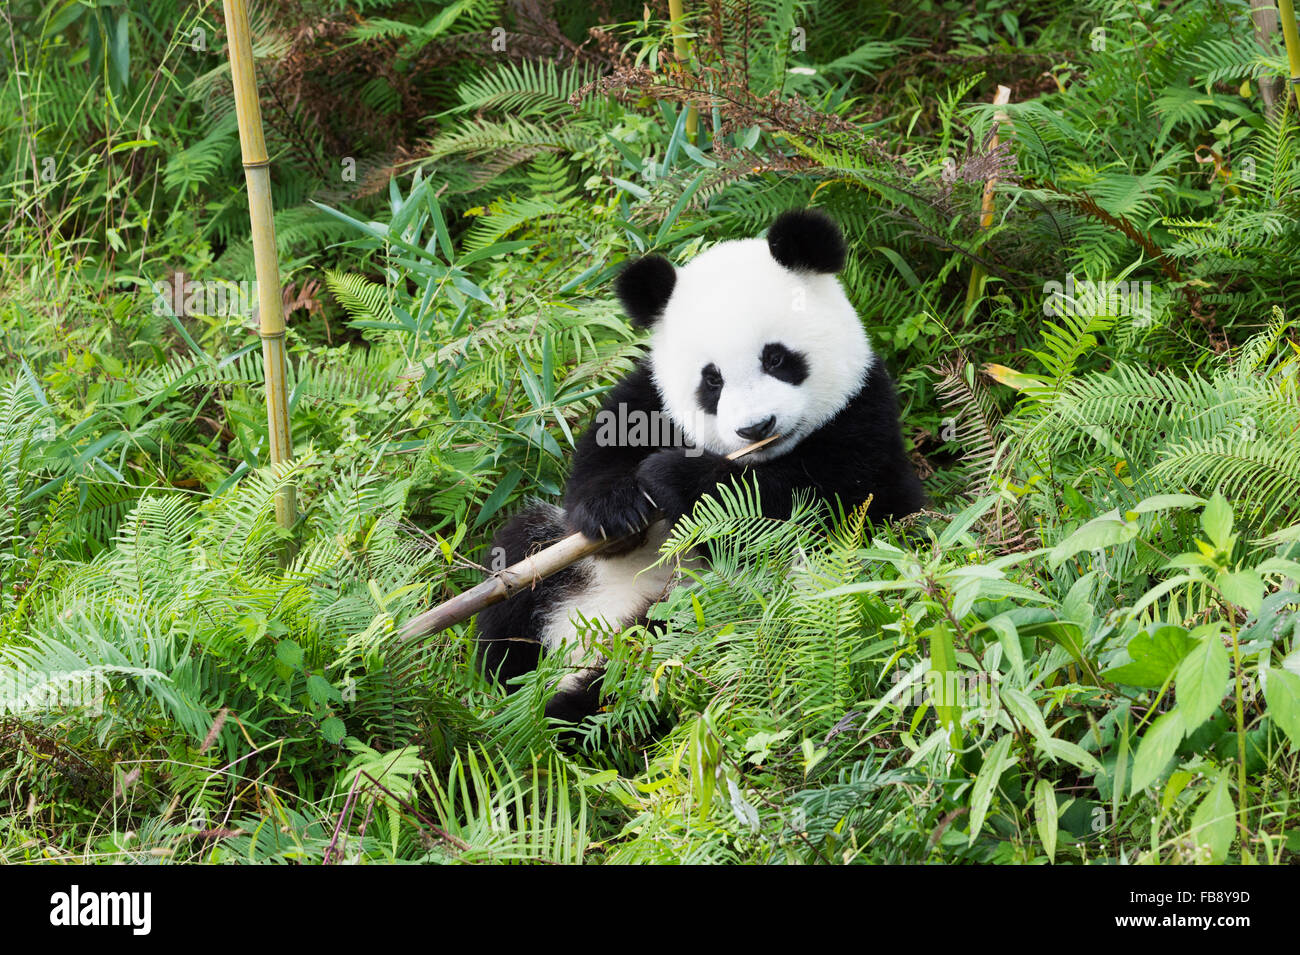 Two years aged young Giant Panda (Ailuropoda melanoleuca), China Conservation and Research Centre for the Giant Pandas, Chengdu, Stock Photo